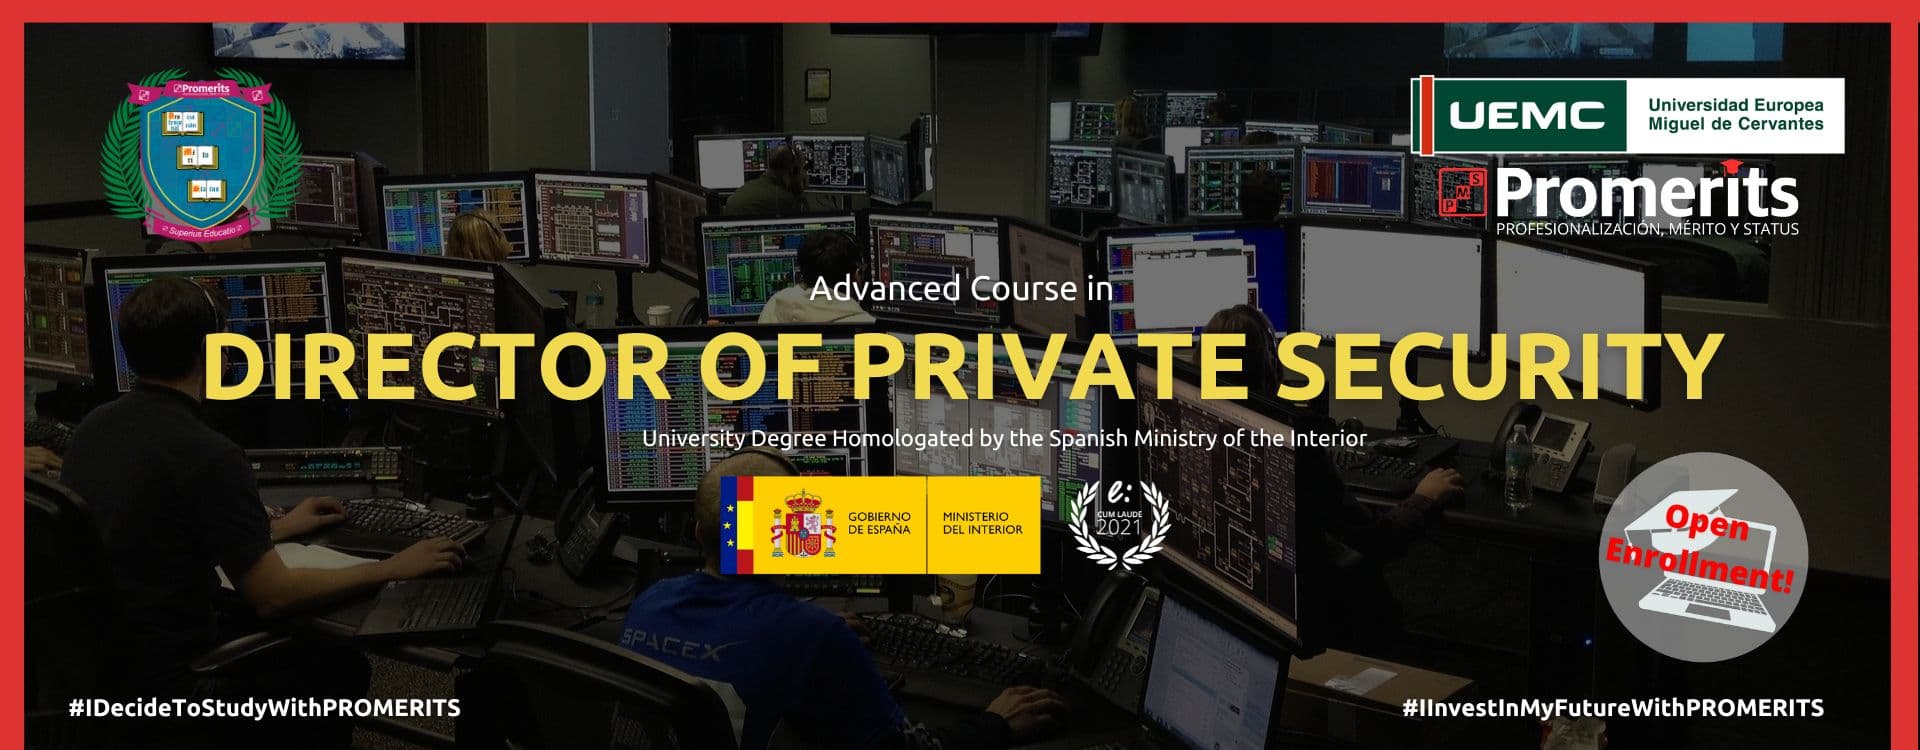 Advanced Course in Director of Private Security